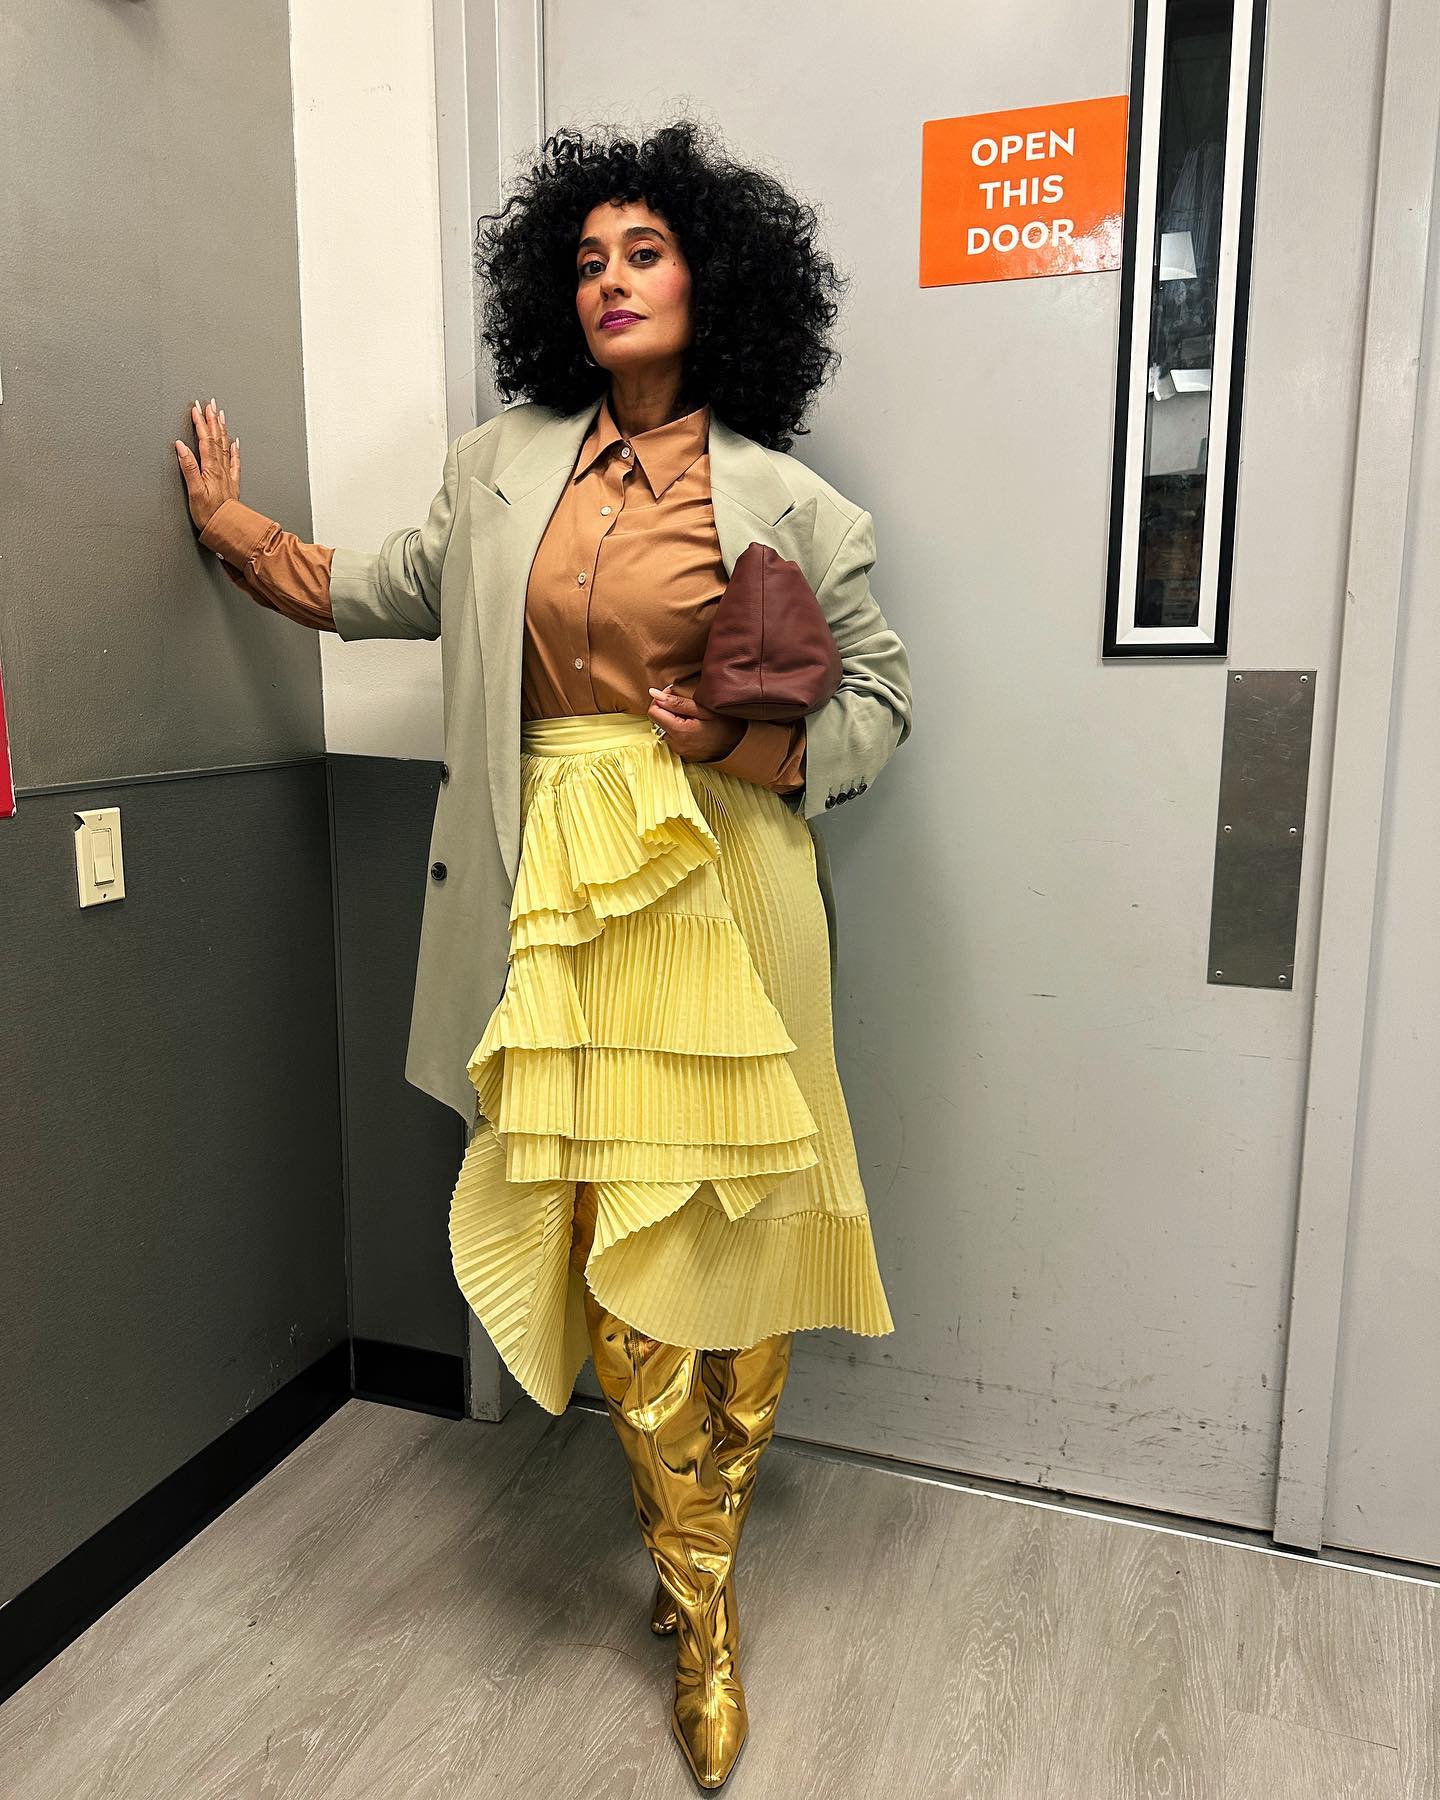 Tracee Ellis Ross's Thigh-High Boots Are Going Viral | Who What Wear